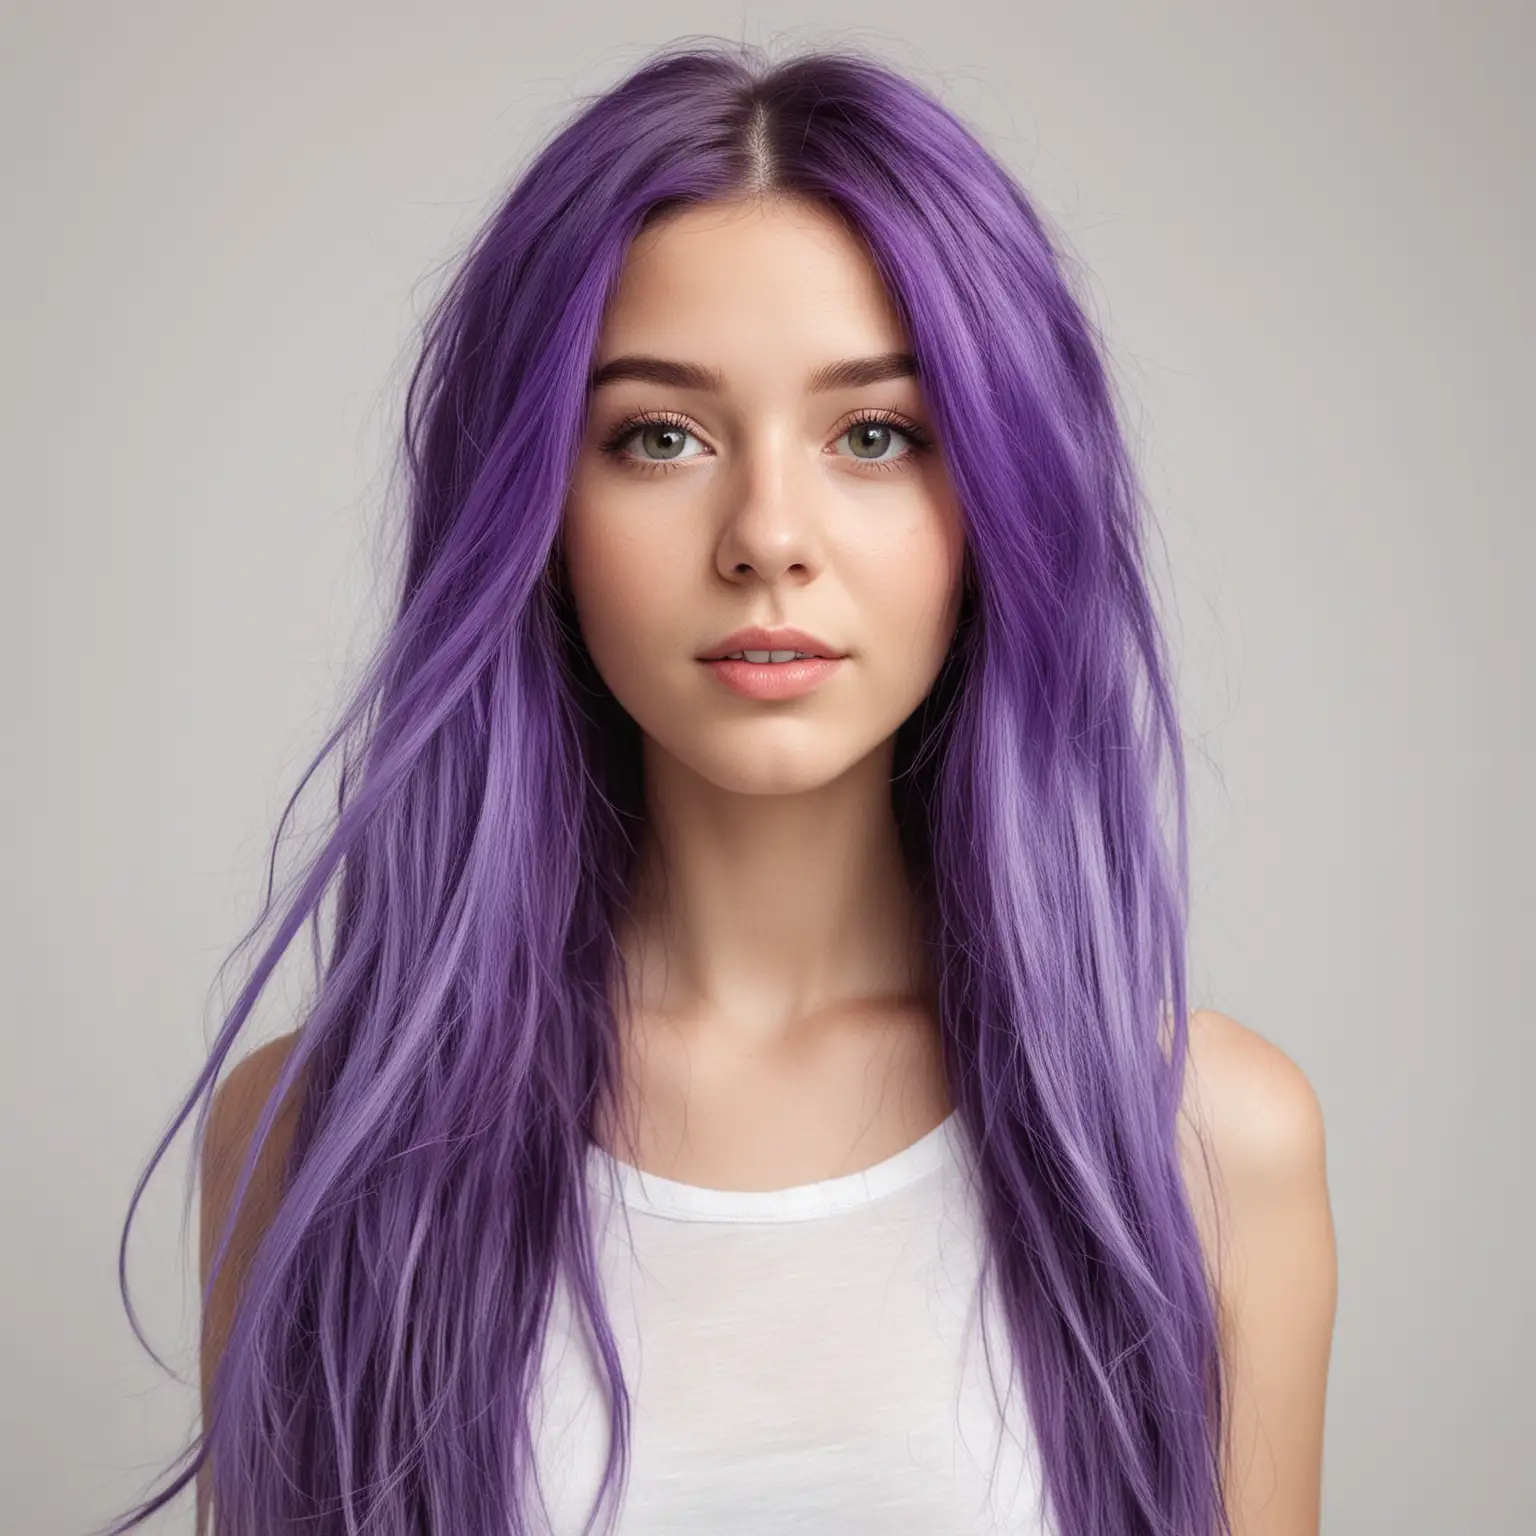 Portrait of a Girl with Bright Purple Long Hair on White Background